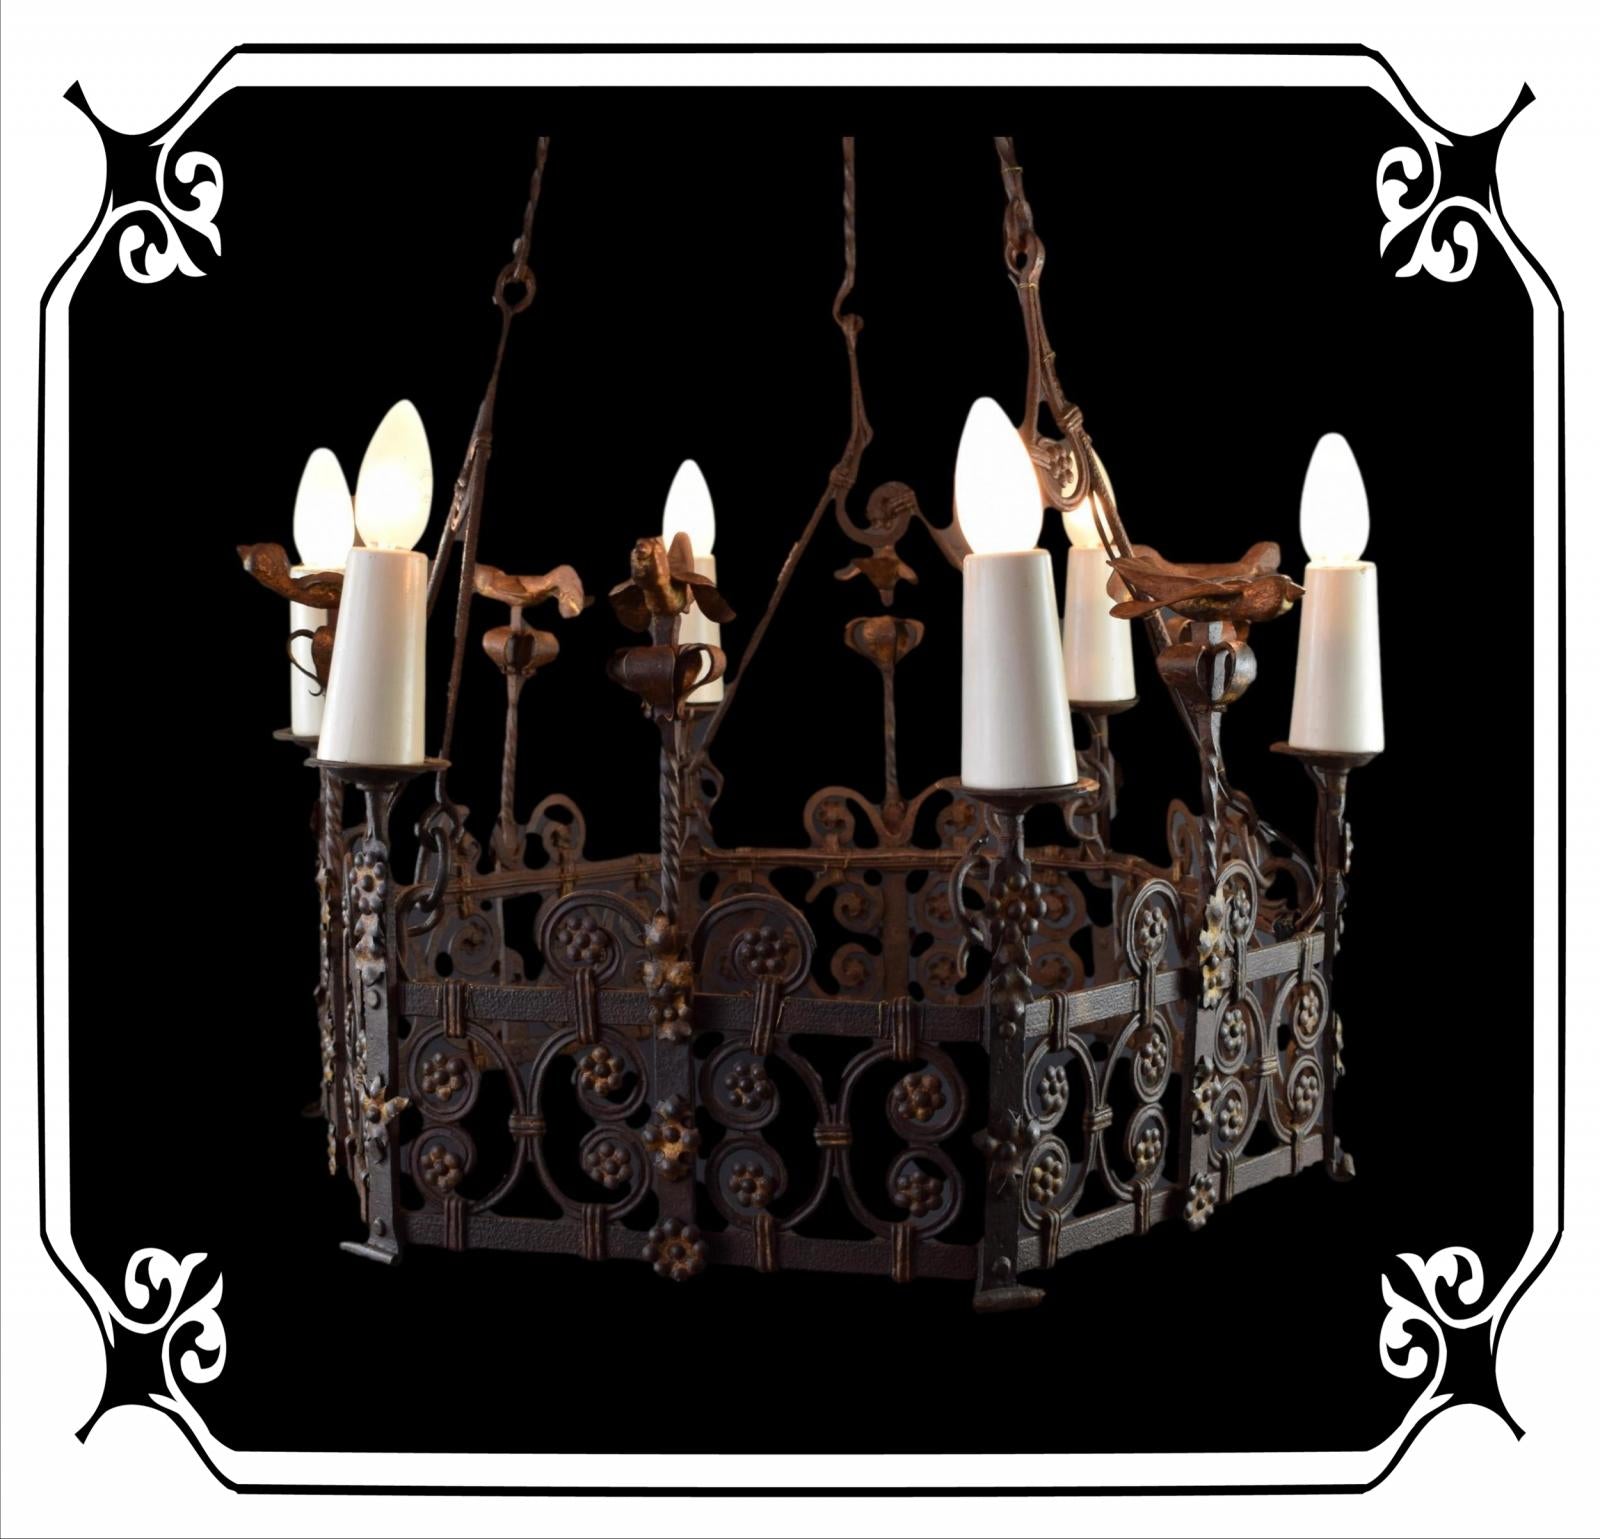 Large chandelier High Period Wrought iron